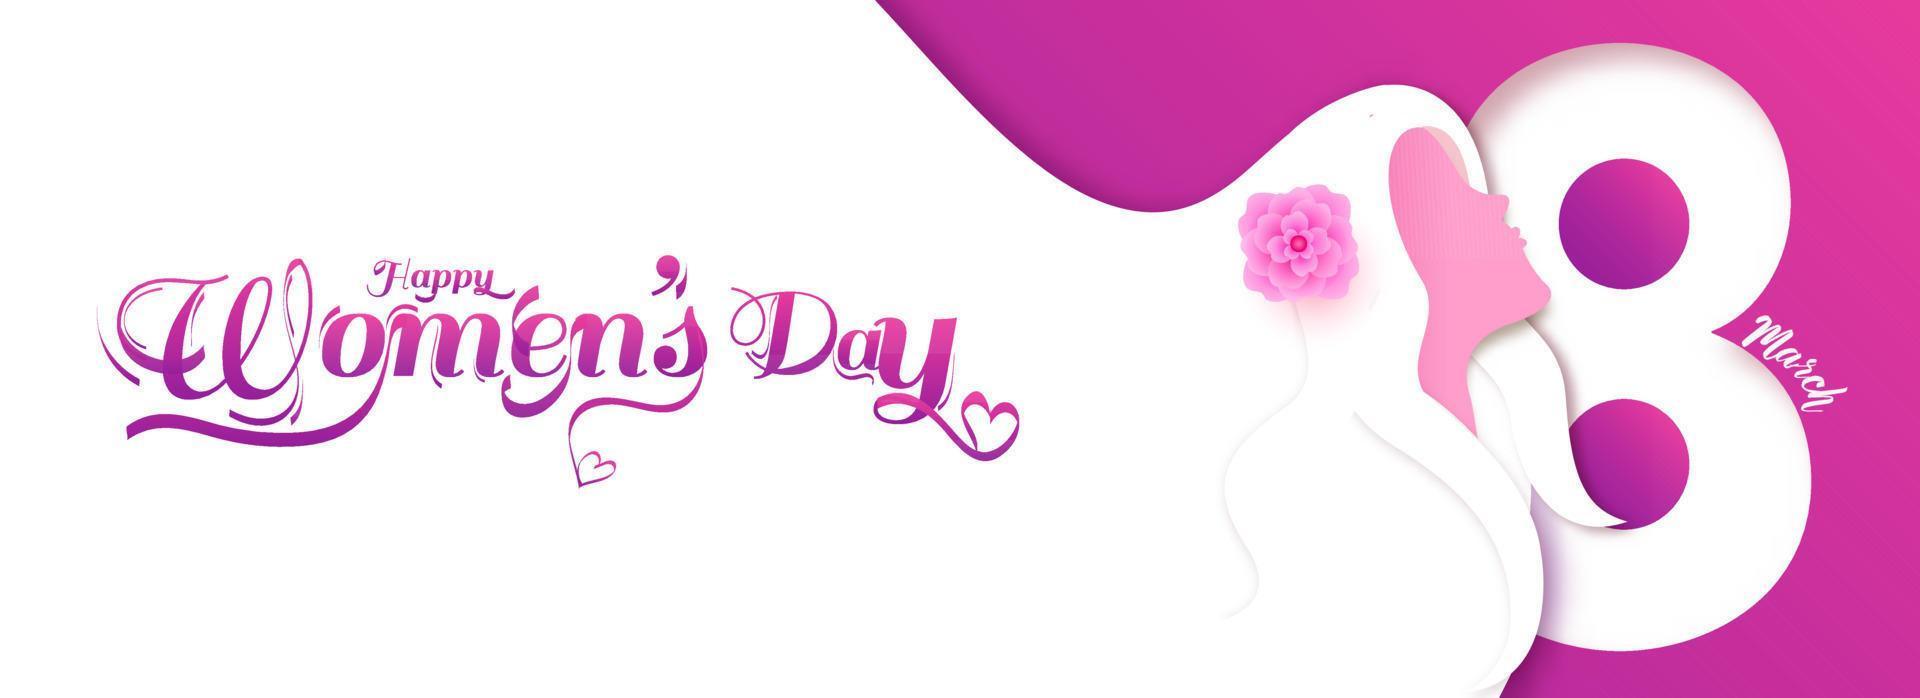 Paper Cut Style 8 March Text with Woman Face Long Hair Flowing on White and Pink Background for Happy Women's Day Celebration. Header or Banner Design. vector